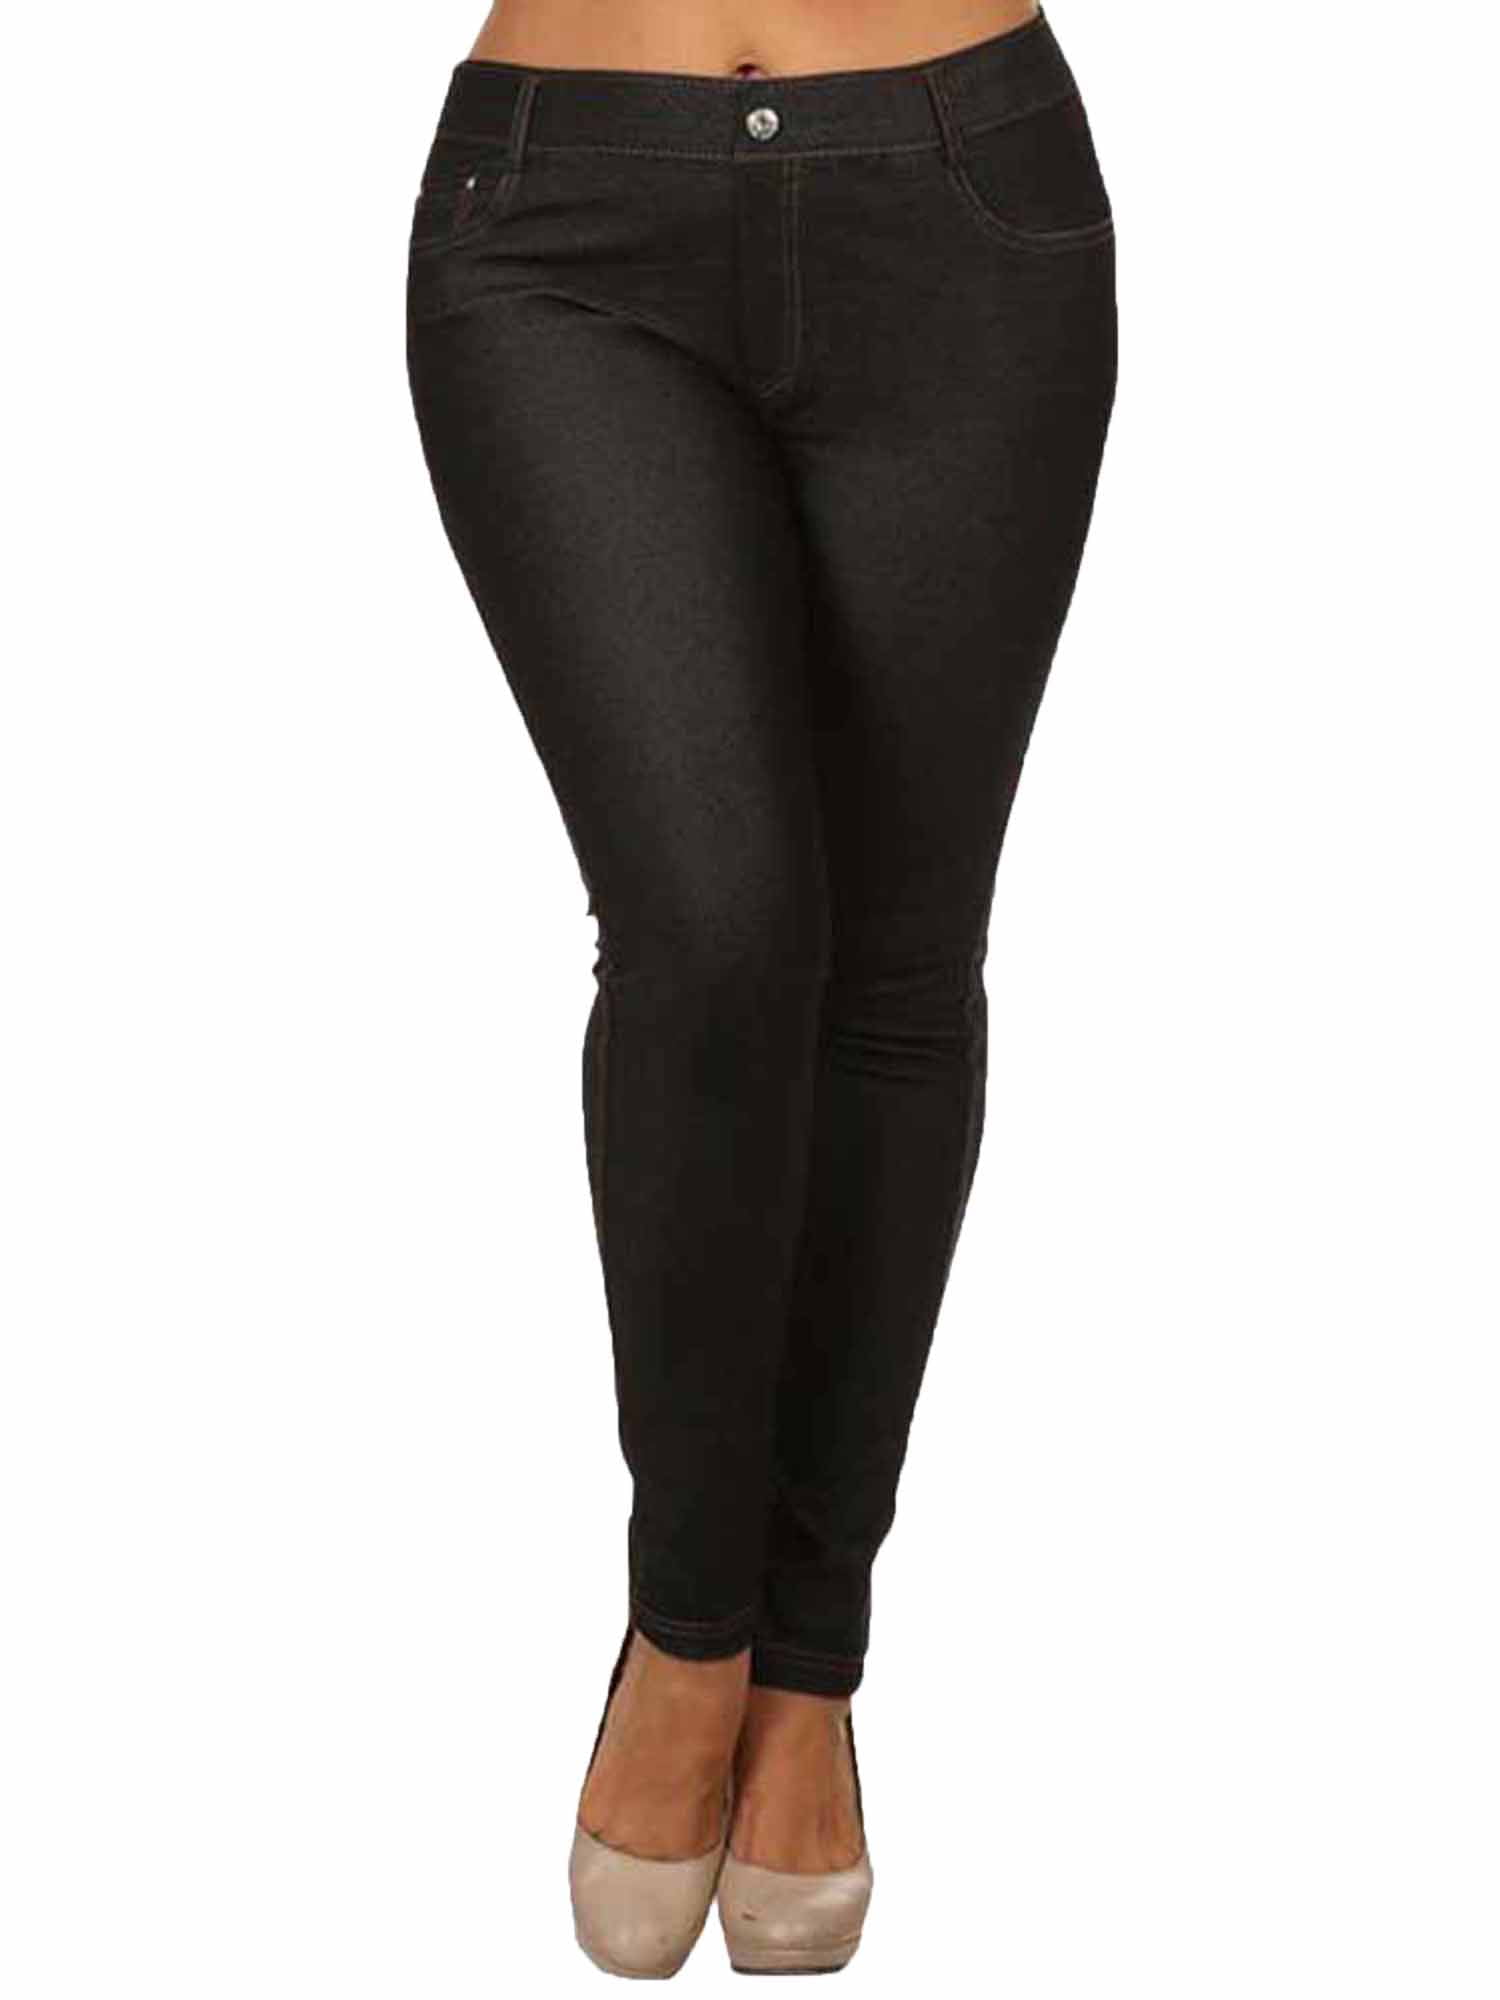 Black Stretchy Plus Size Jeggings With 5 Pockets Size X-Large